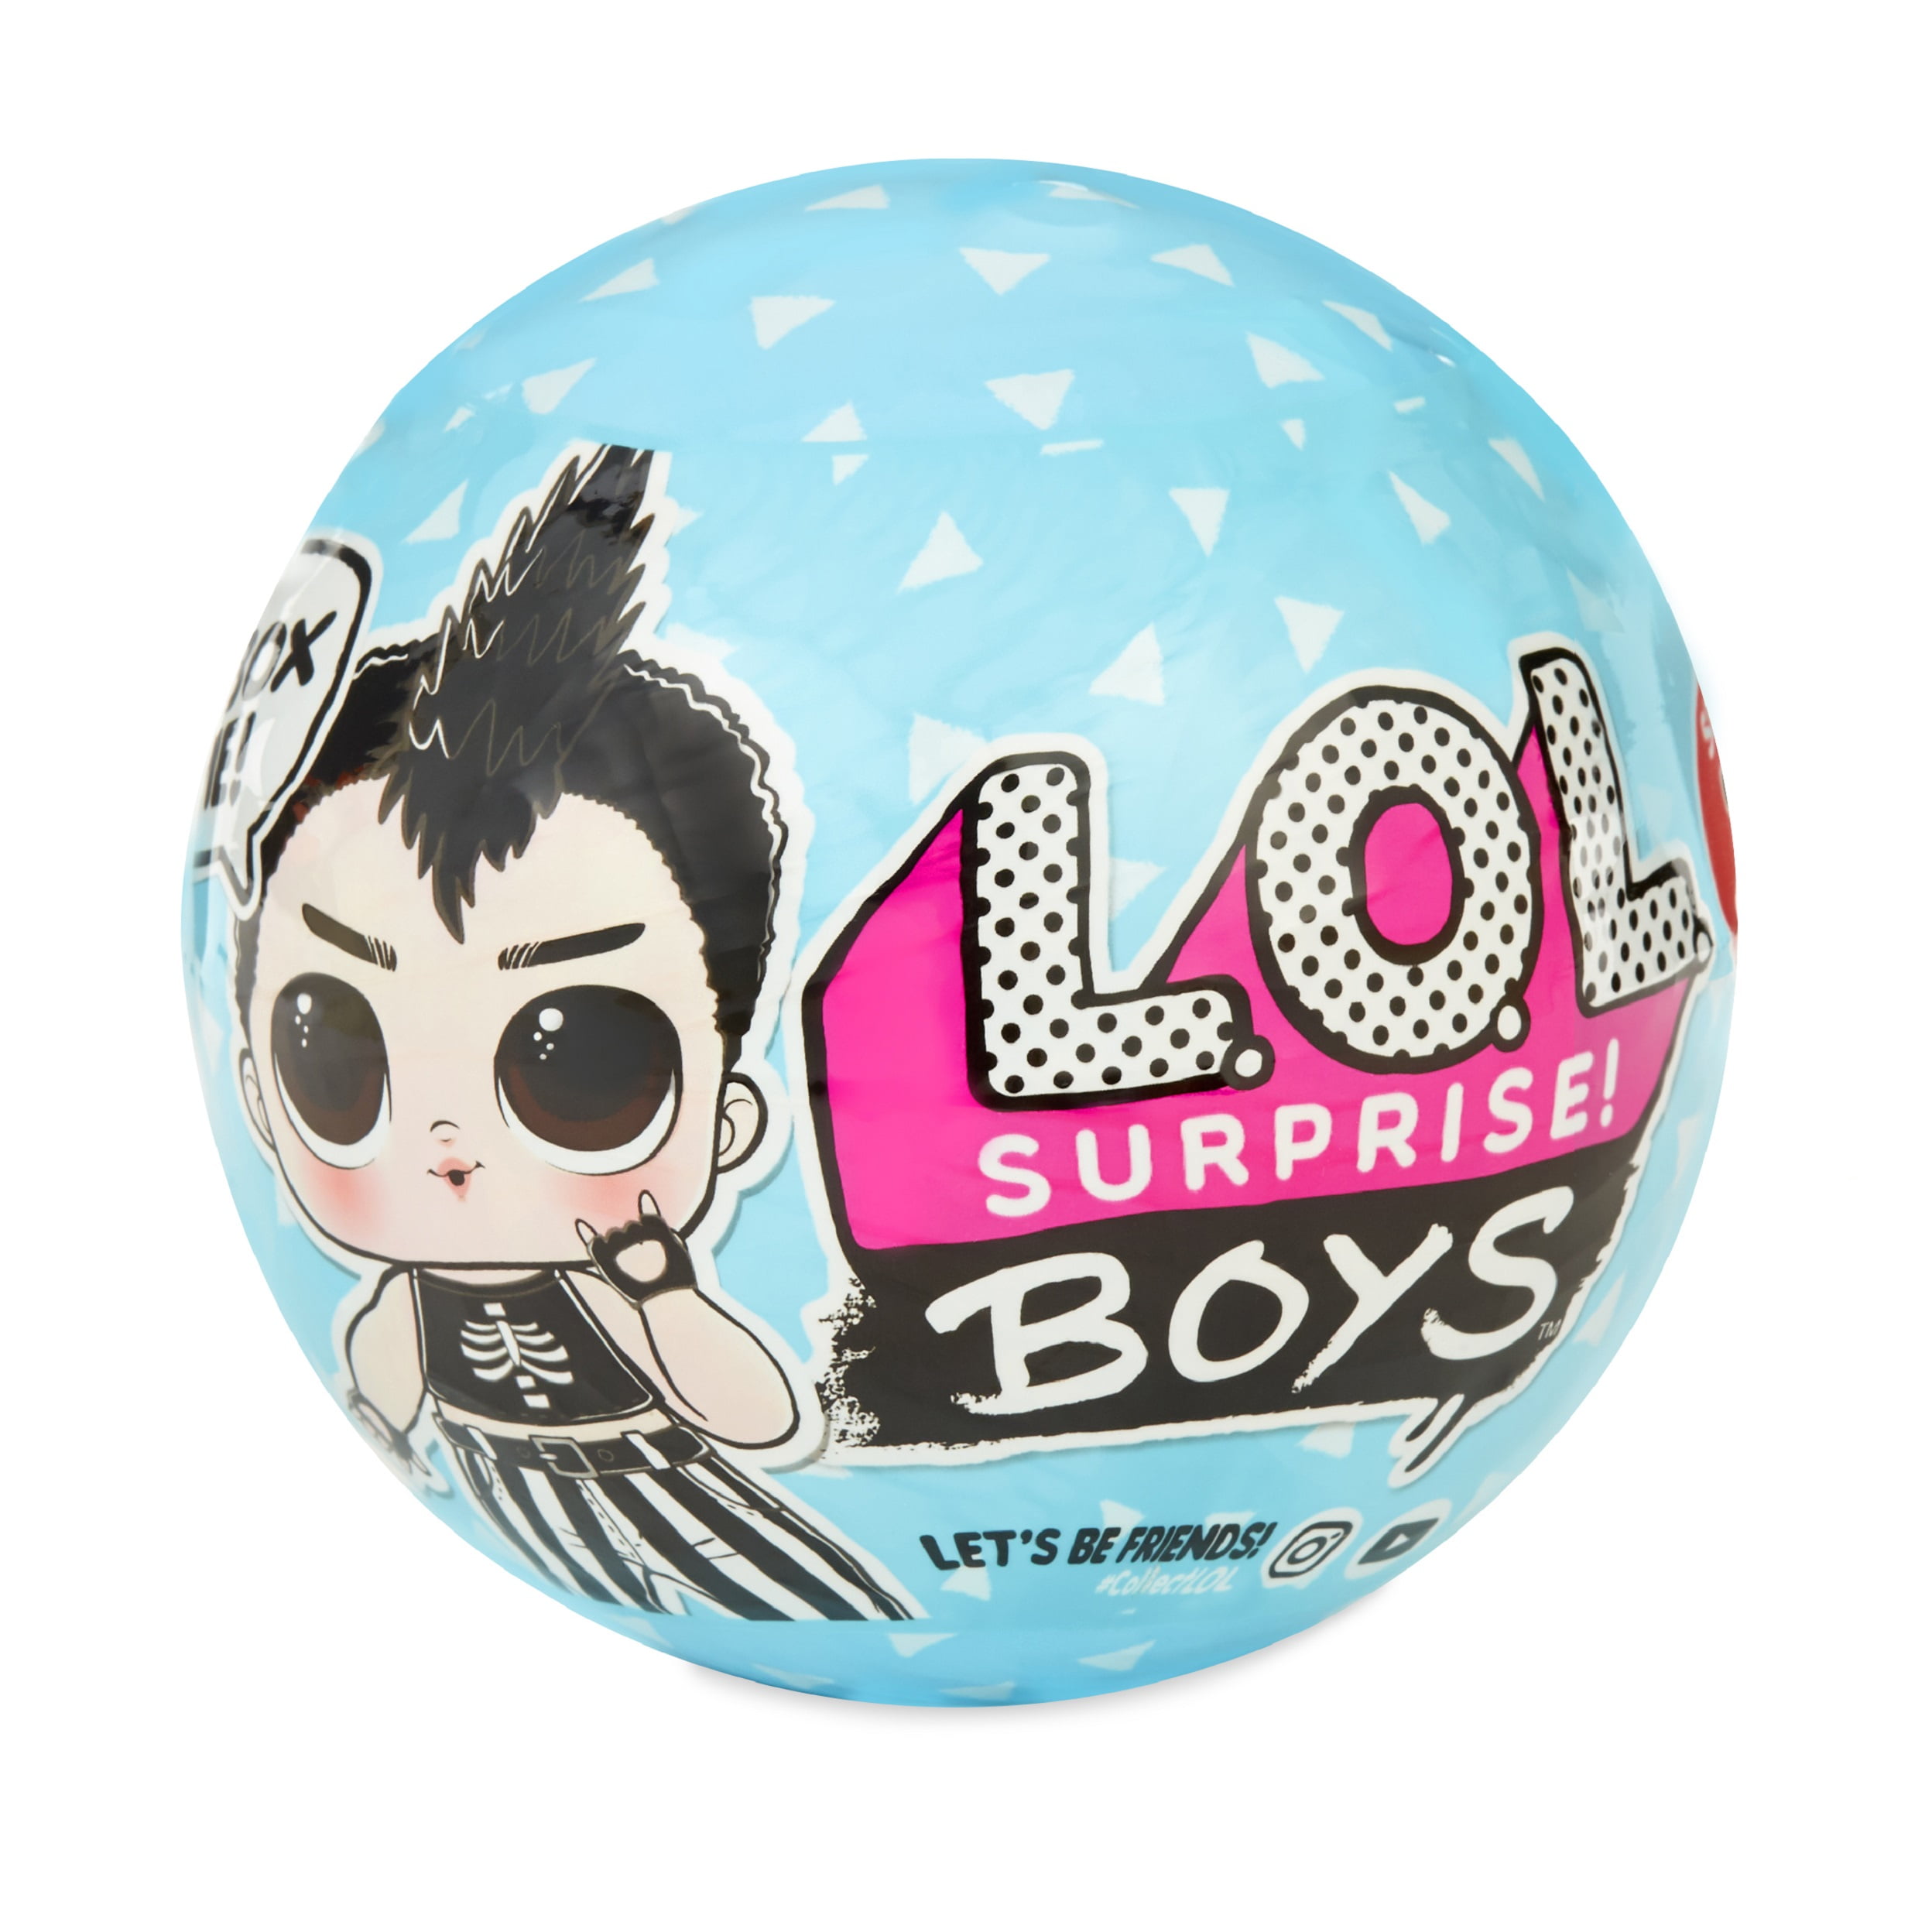 L.O.L. Surprise! Boys Character Doll 